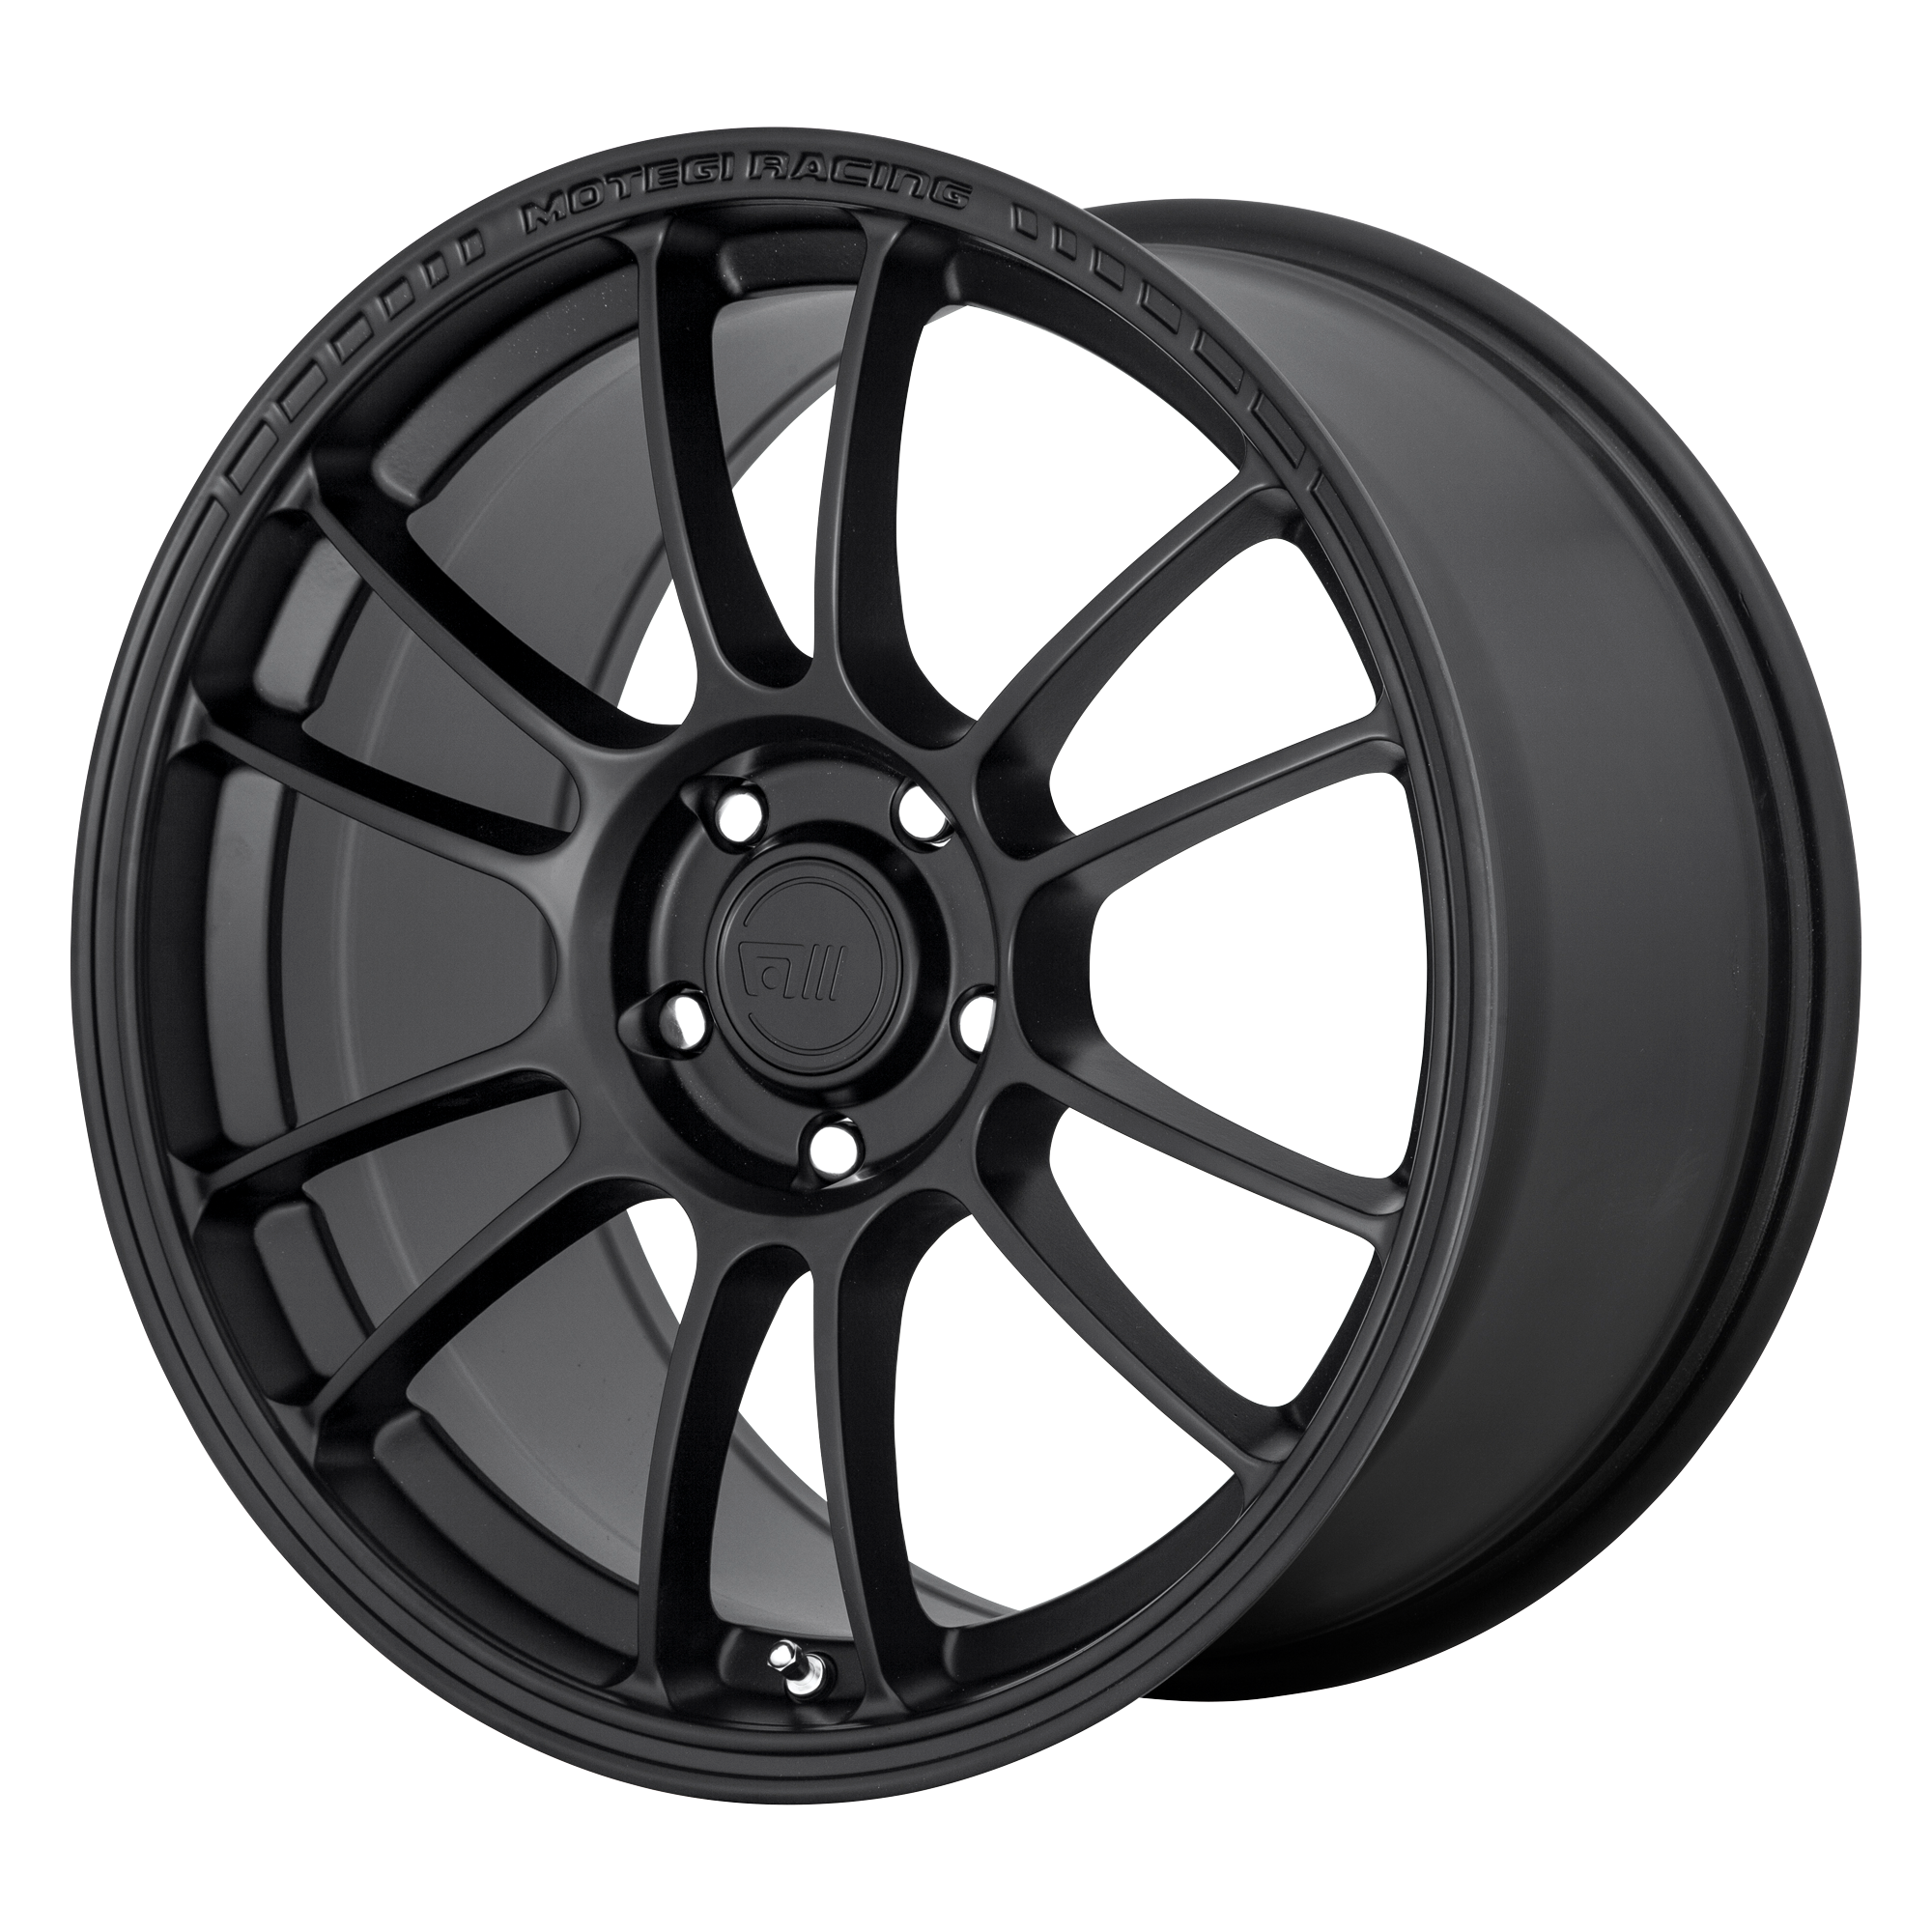 SS6 17x8.5 5x114.30 SATIN BLACK (42 mm) - Tires and Engine Performance